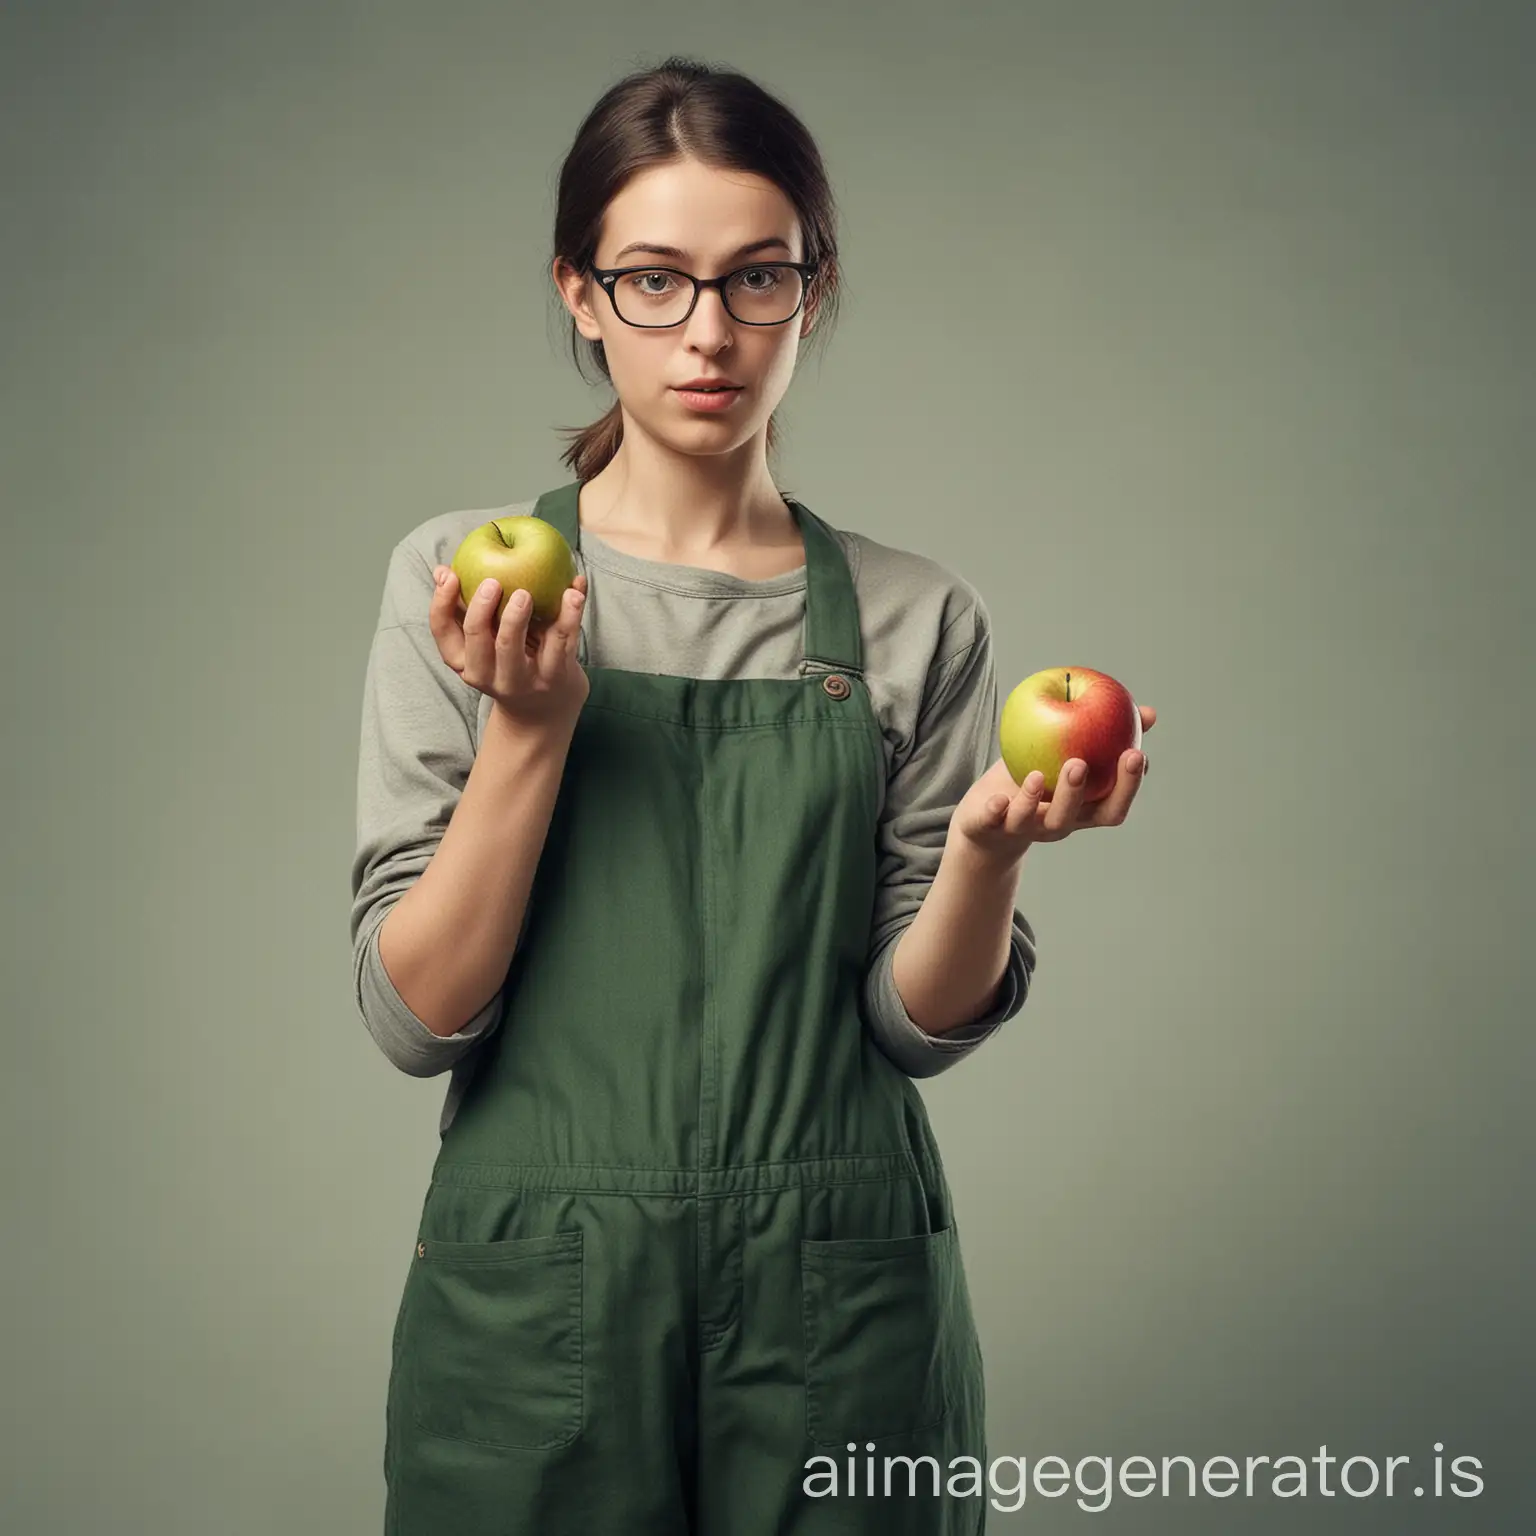 generate please an image of a confused human being holding an organic apple in one hand and conventional pair in his/her other hand